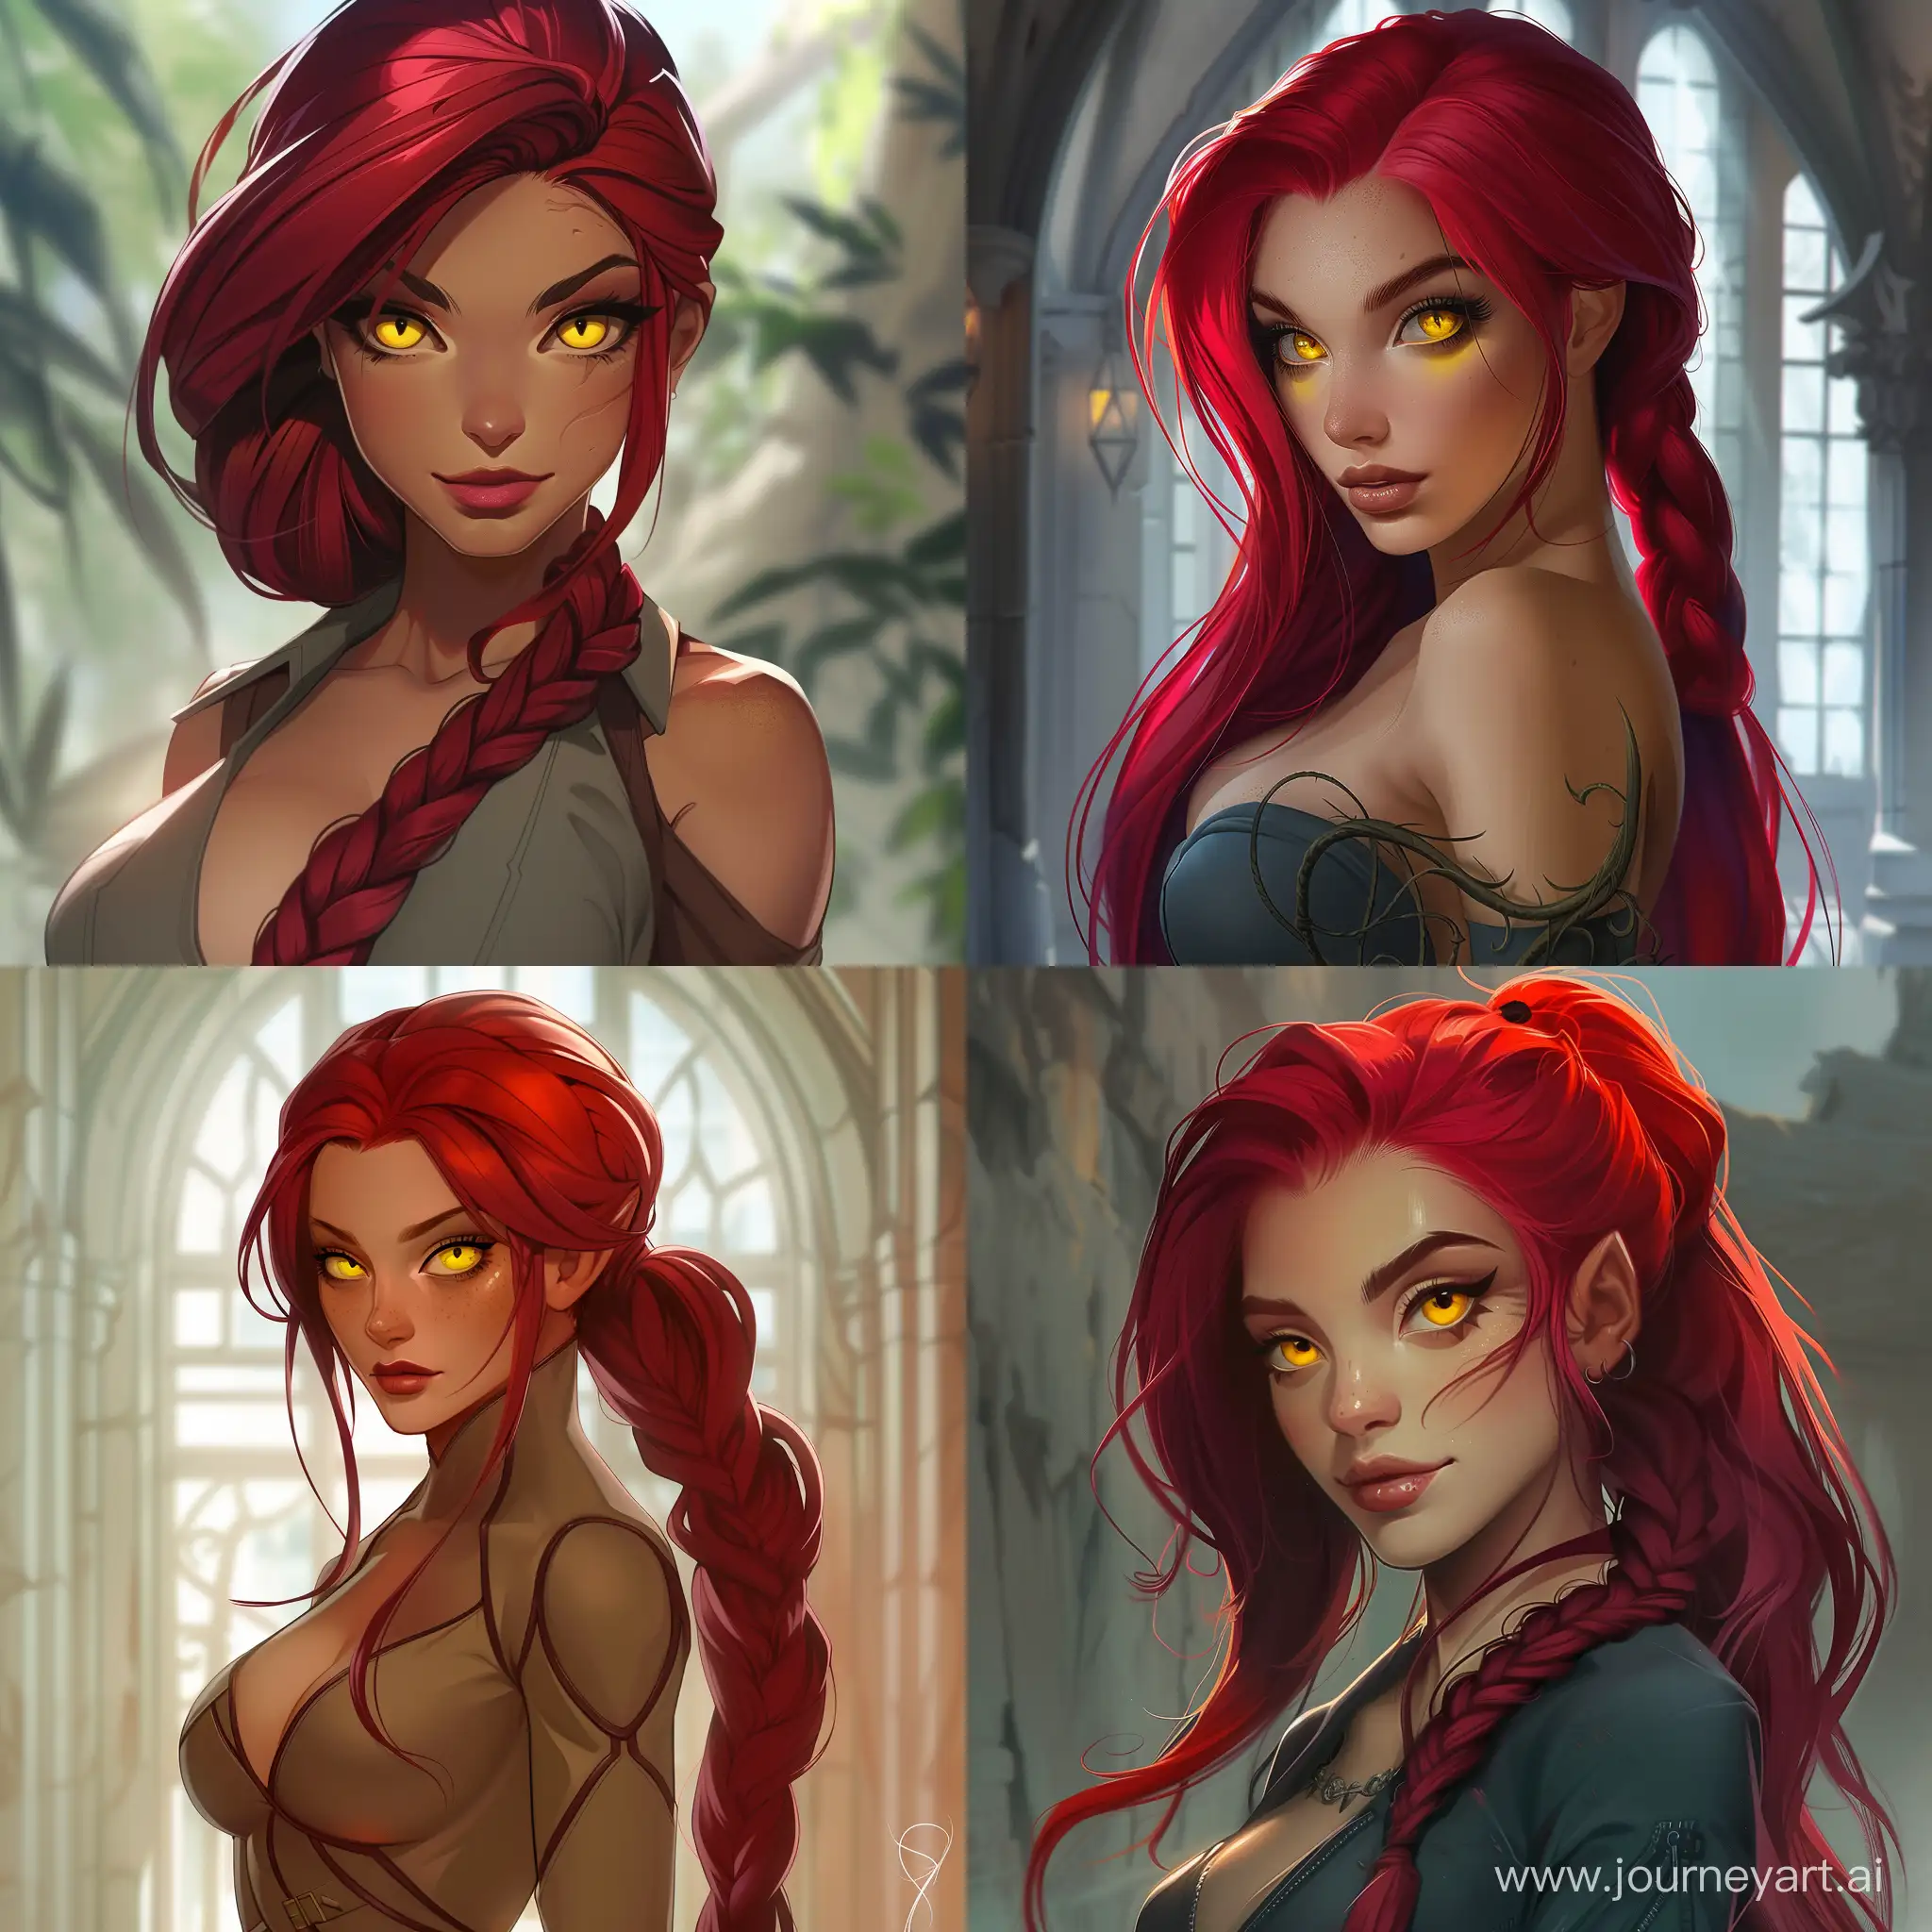 Makima's red hair flows gracefully, adding a sense of dynamism to her appearance.
Her yellow eyes are piercing, revealing a confident and commanding presence.
The braided ponytail is carefully done, adding a touch of elegance.
Makima wears a stylish and form-fitting outfit that hints at her confidence without being overly revealing.
The clothing choice complements her figure while maintaining a sense of professionalism.
The background could be a sophisticated setting, like an upscale office or a fantasy environment that complements her character.